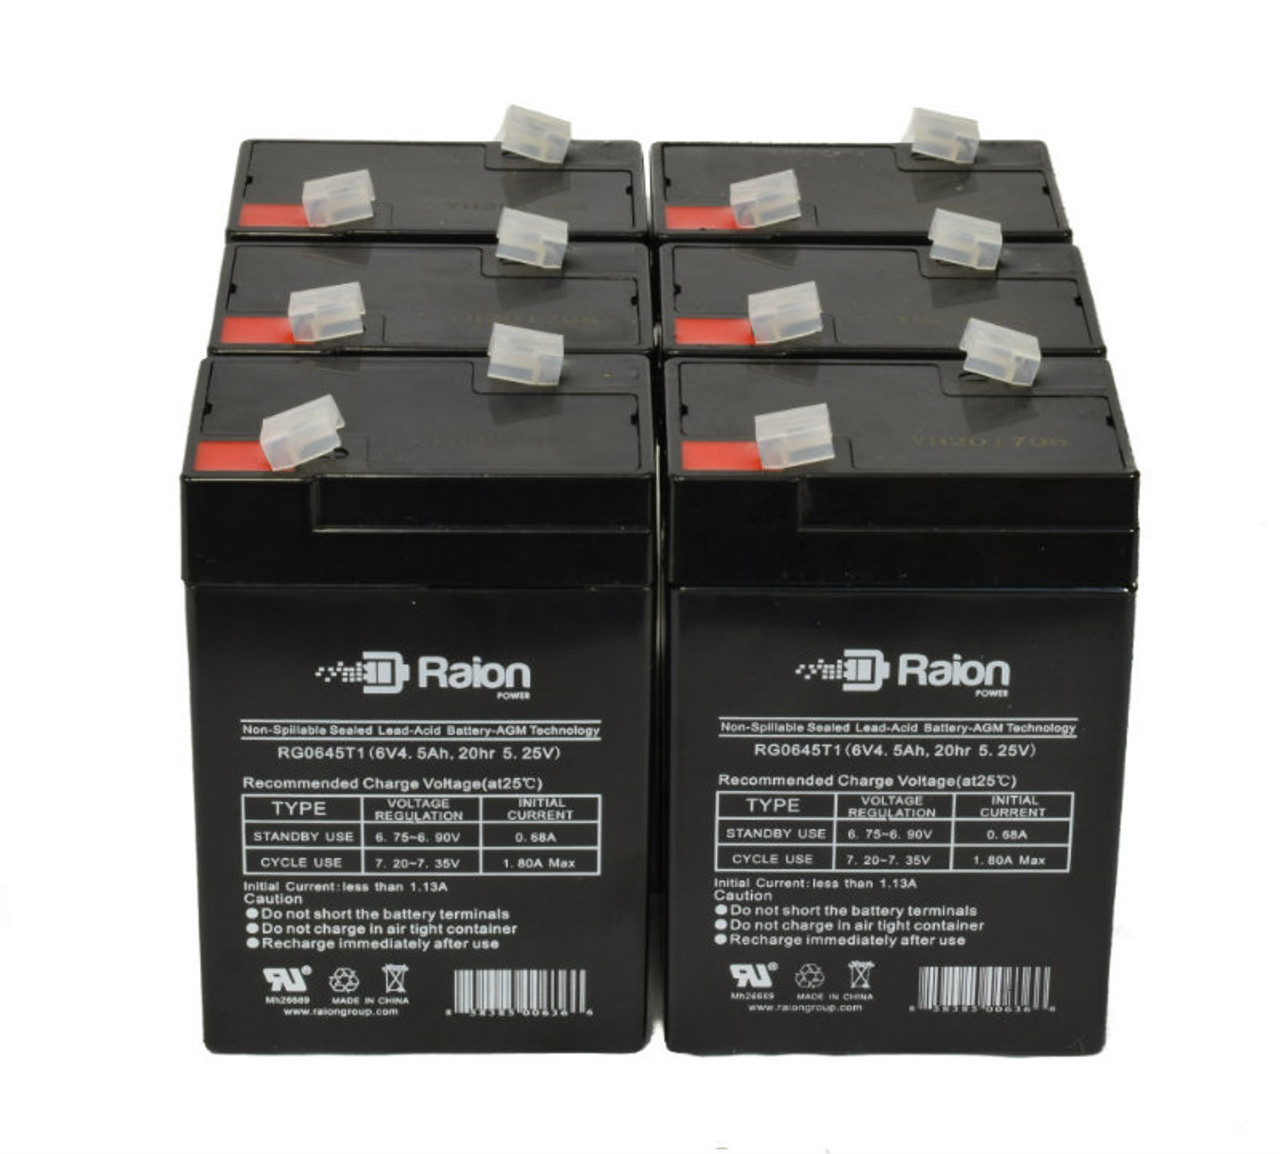 Raion Power 6 Volt 4.5Ah RG0645T1 Replacement Battery for Panasonic LC-R064R5P - 6 Pack